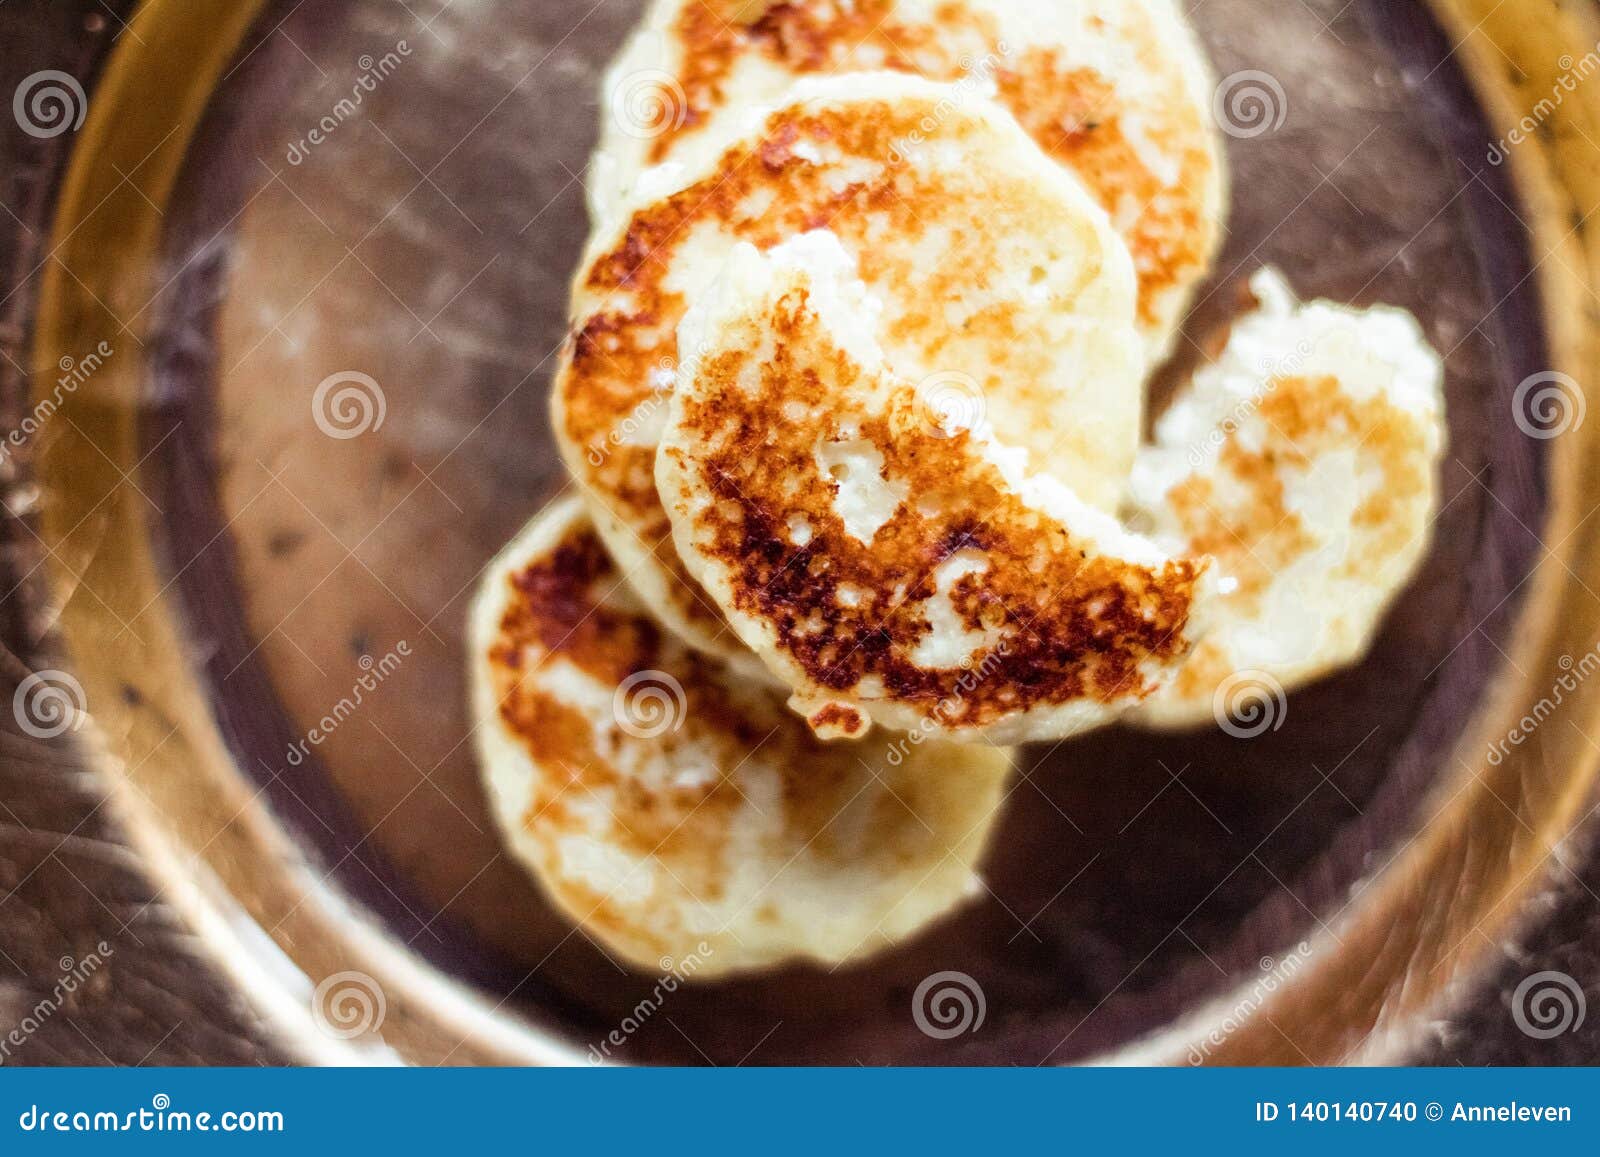 Your Favourite Homemade Breakfast Is Served Stock Photo Image Of